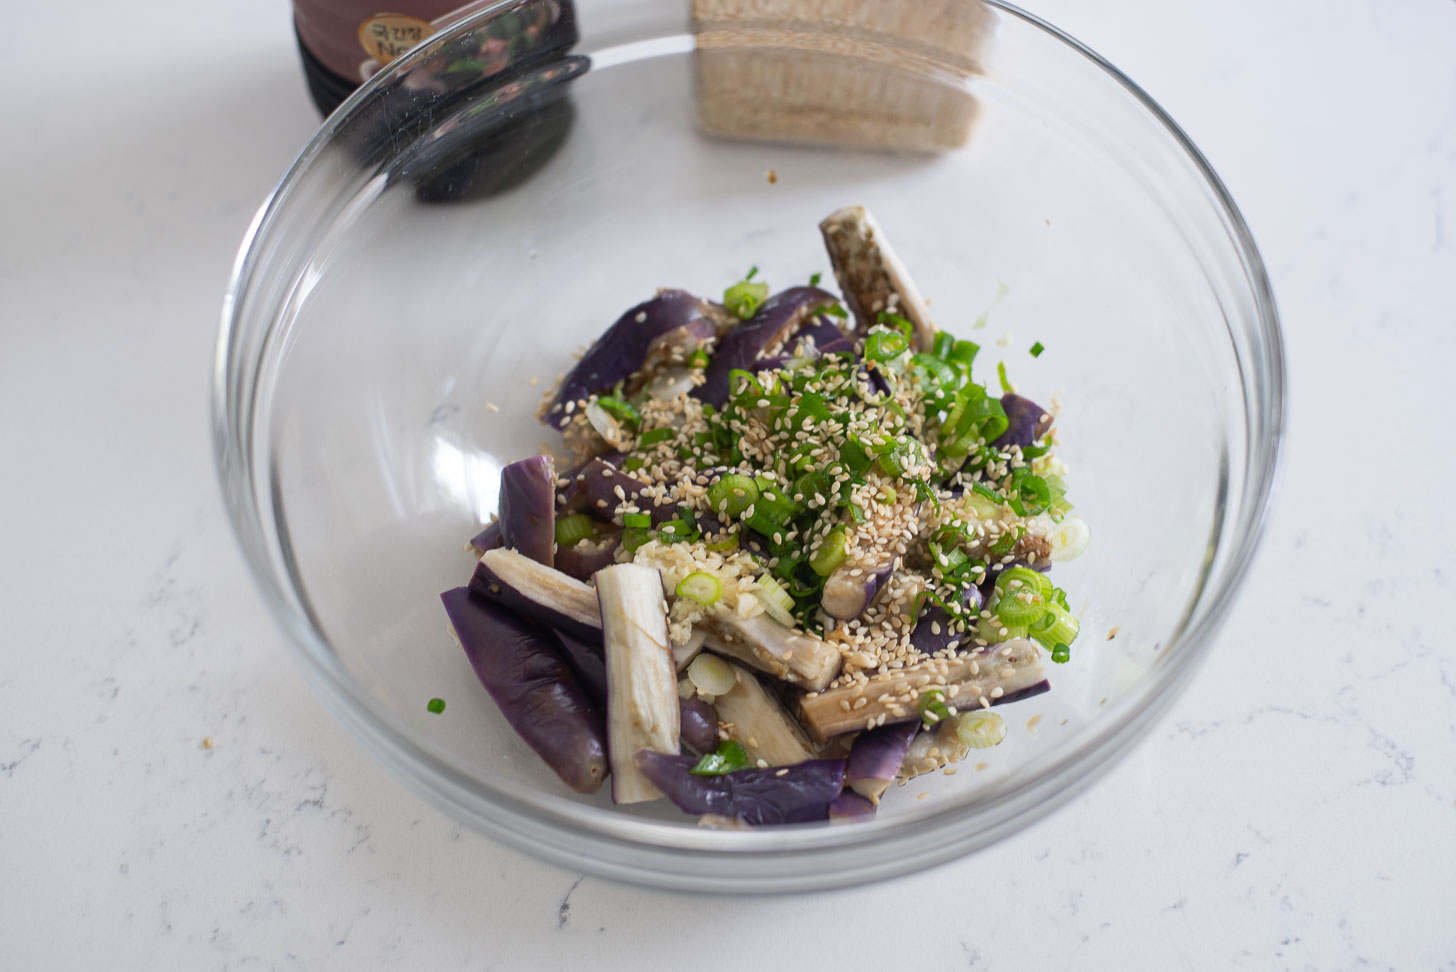 Korean eggplant side dish seasonings are added to steamed eggplants in a bowl.